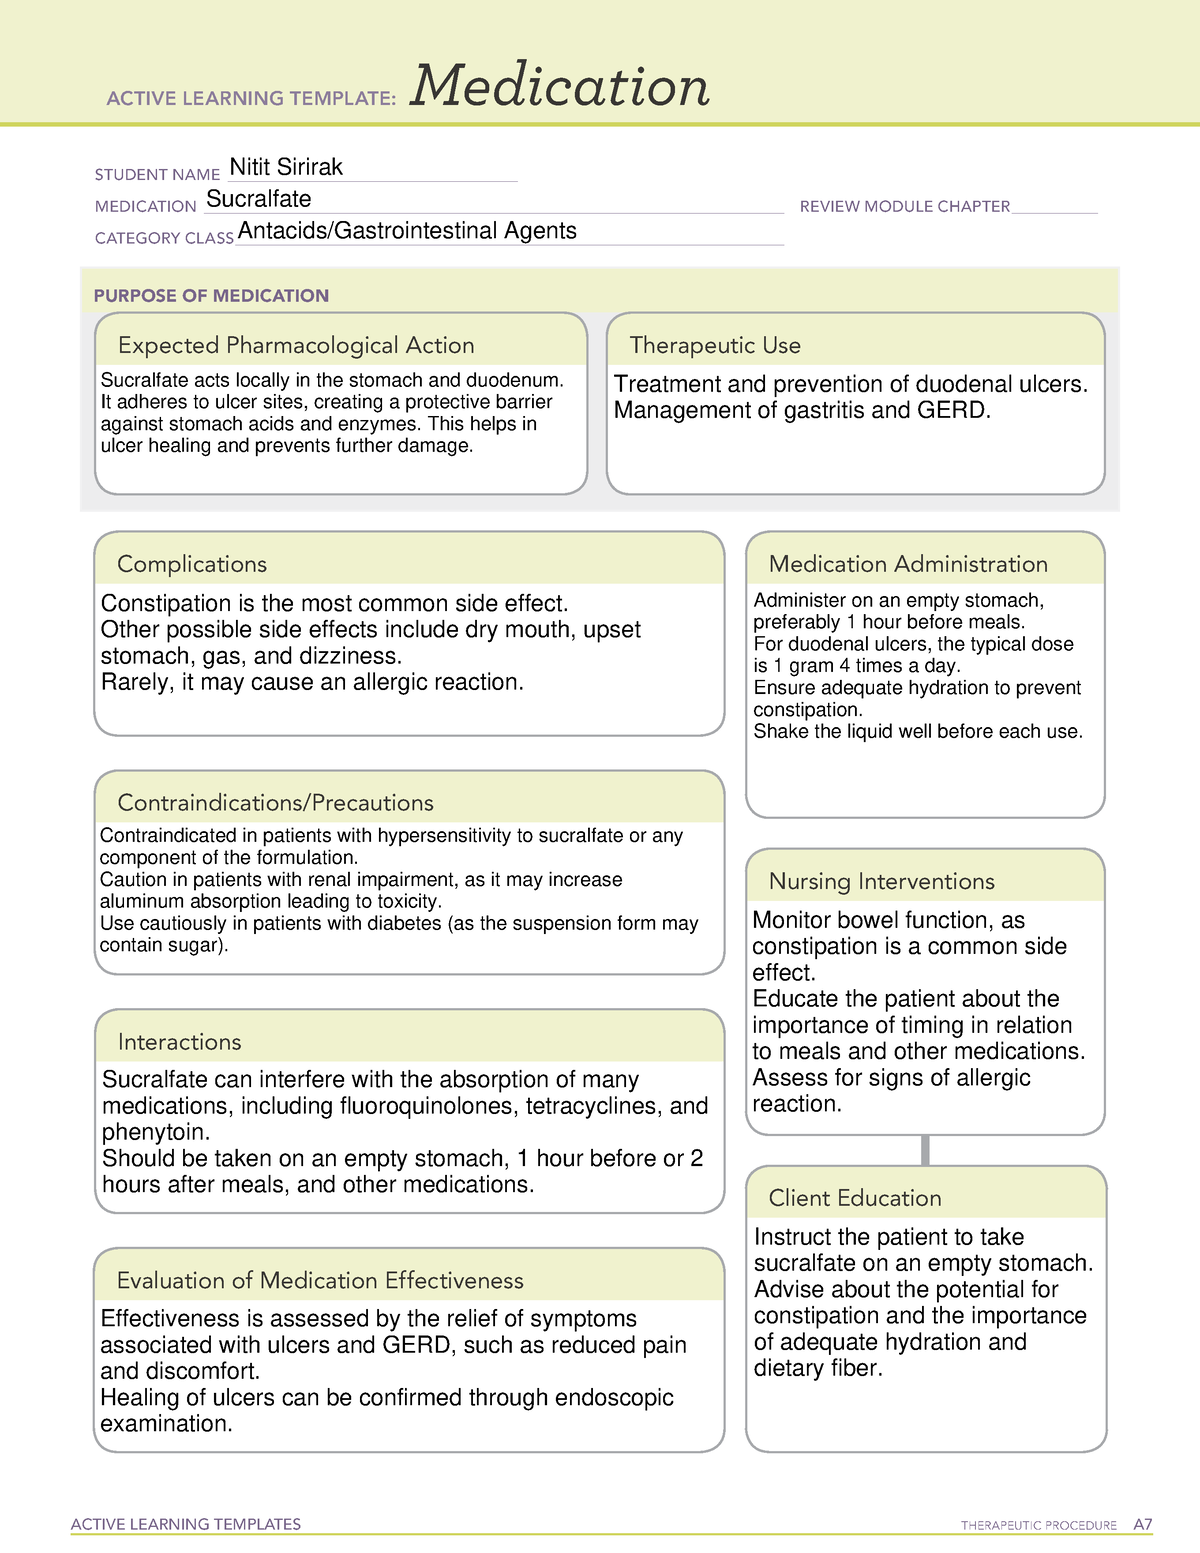 Sucralfate ATI MED TEMPLATE ACTIVE LEARNING TEMPLATES TherapeuTic